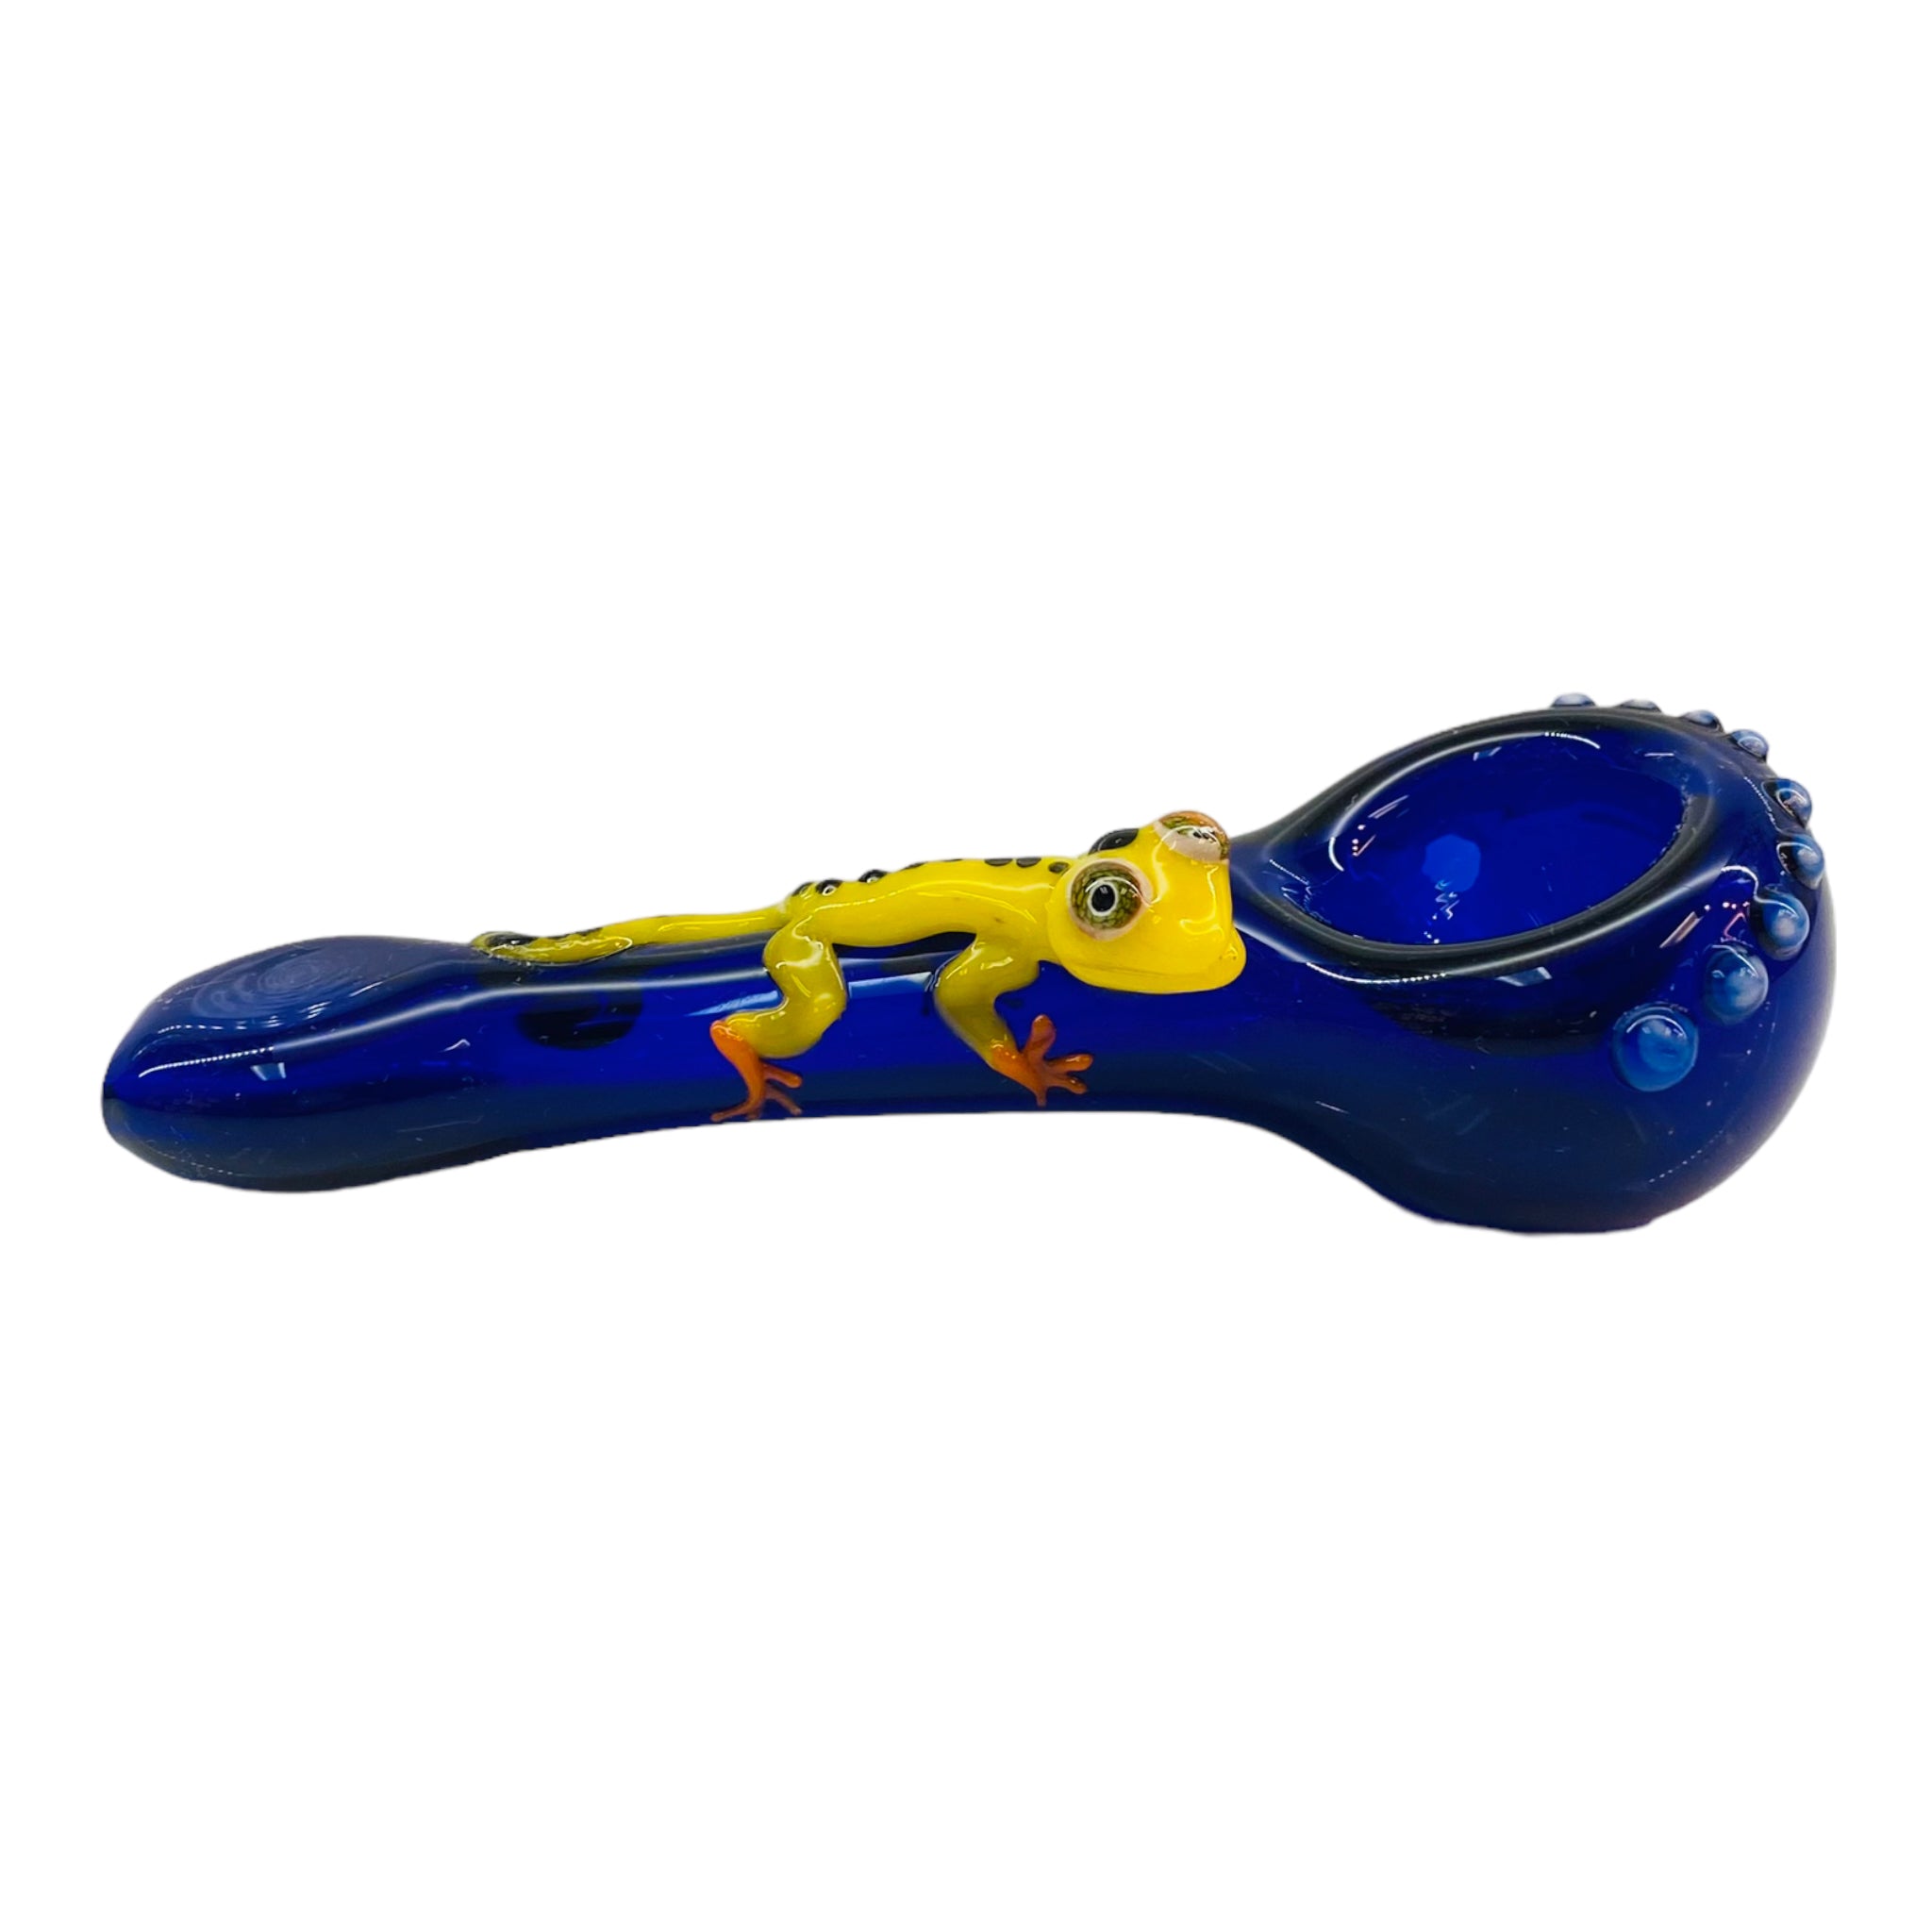 Blue Glass Hand Pipe With Small Cute Yellow Gecko Lizard